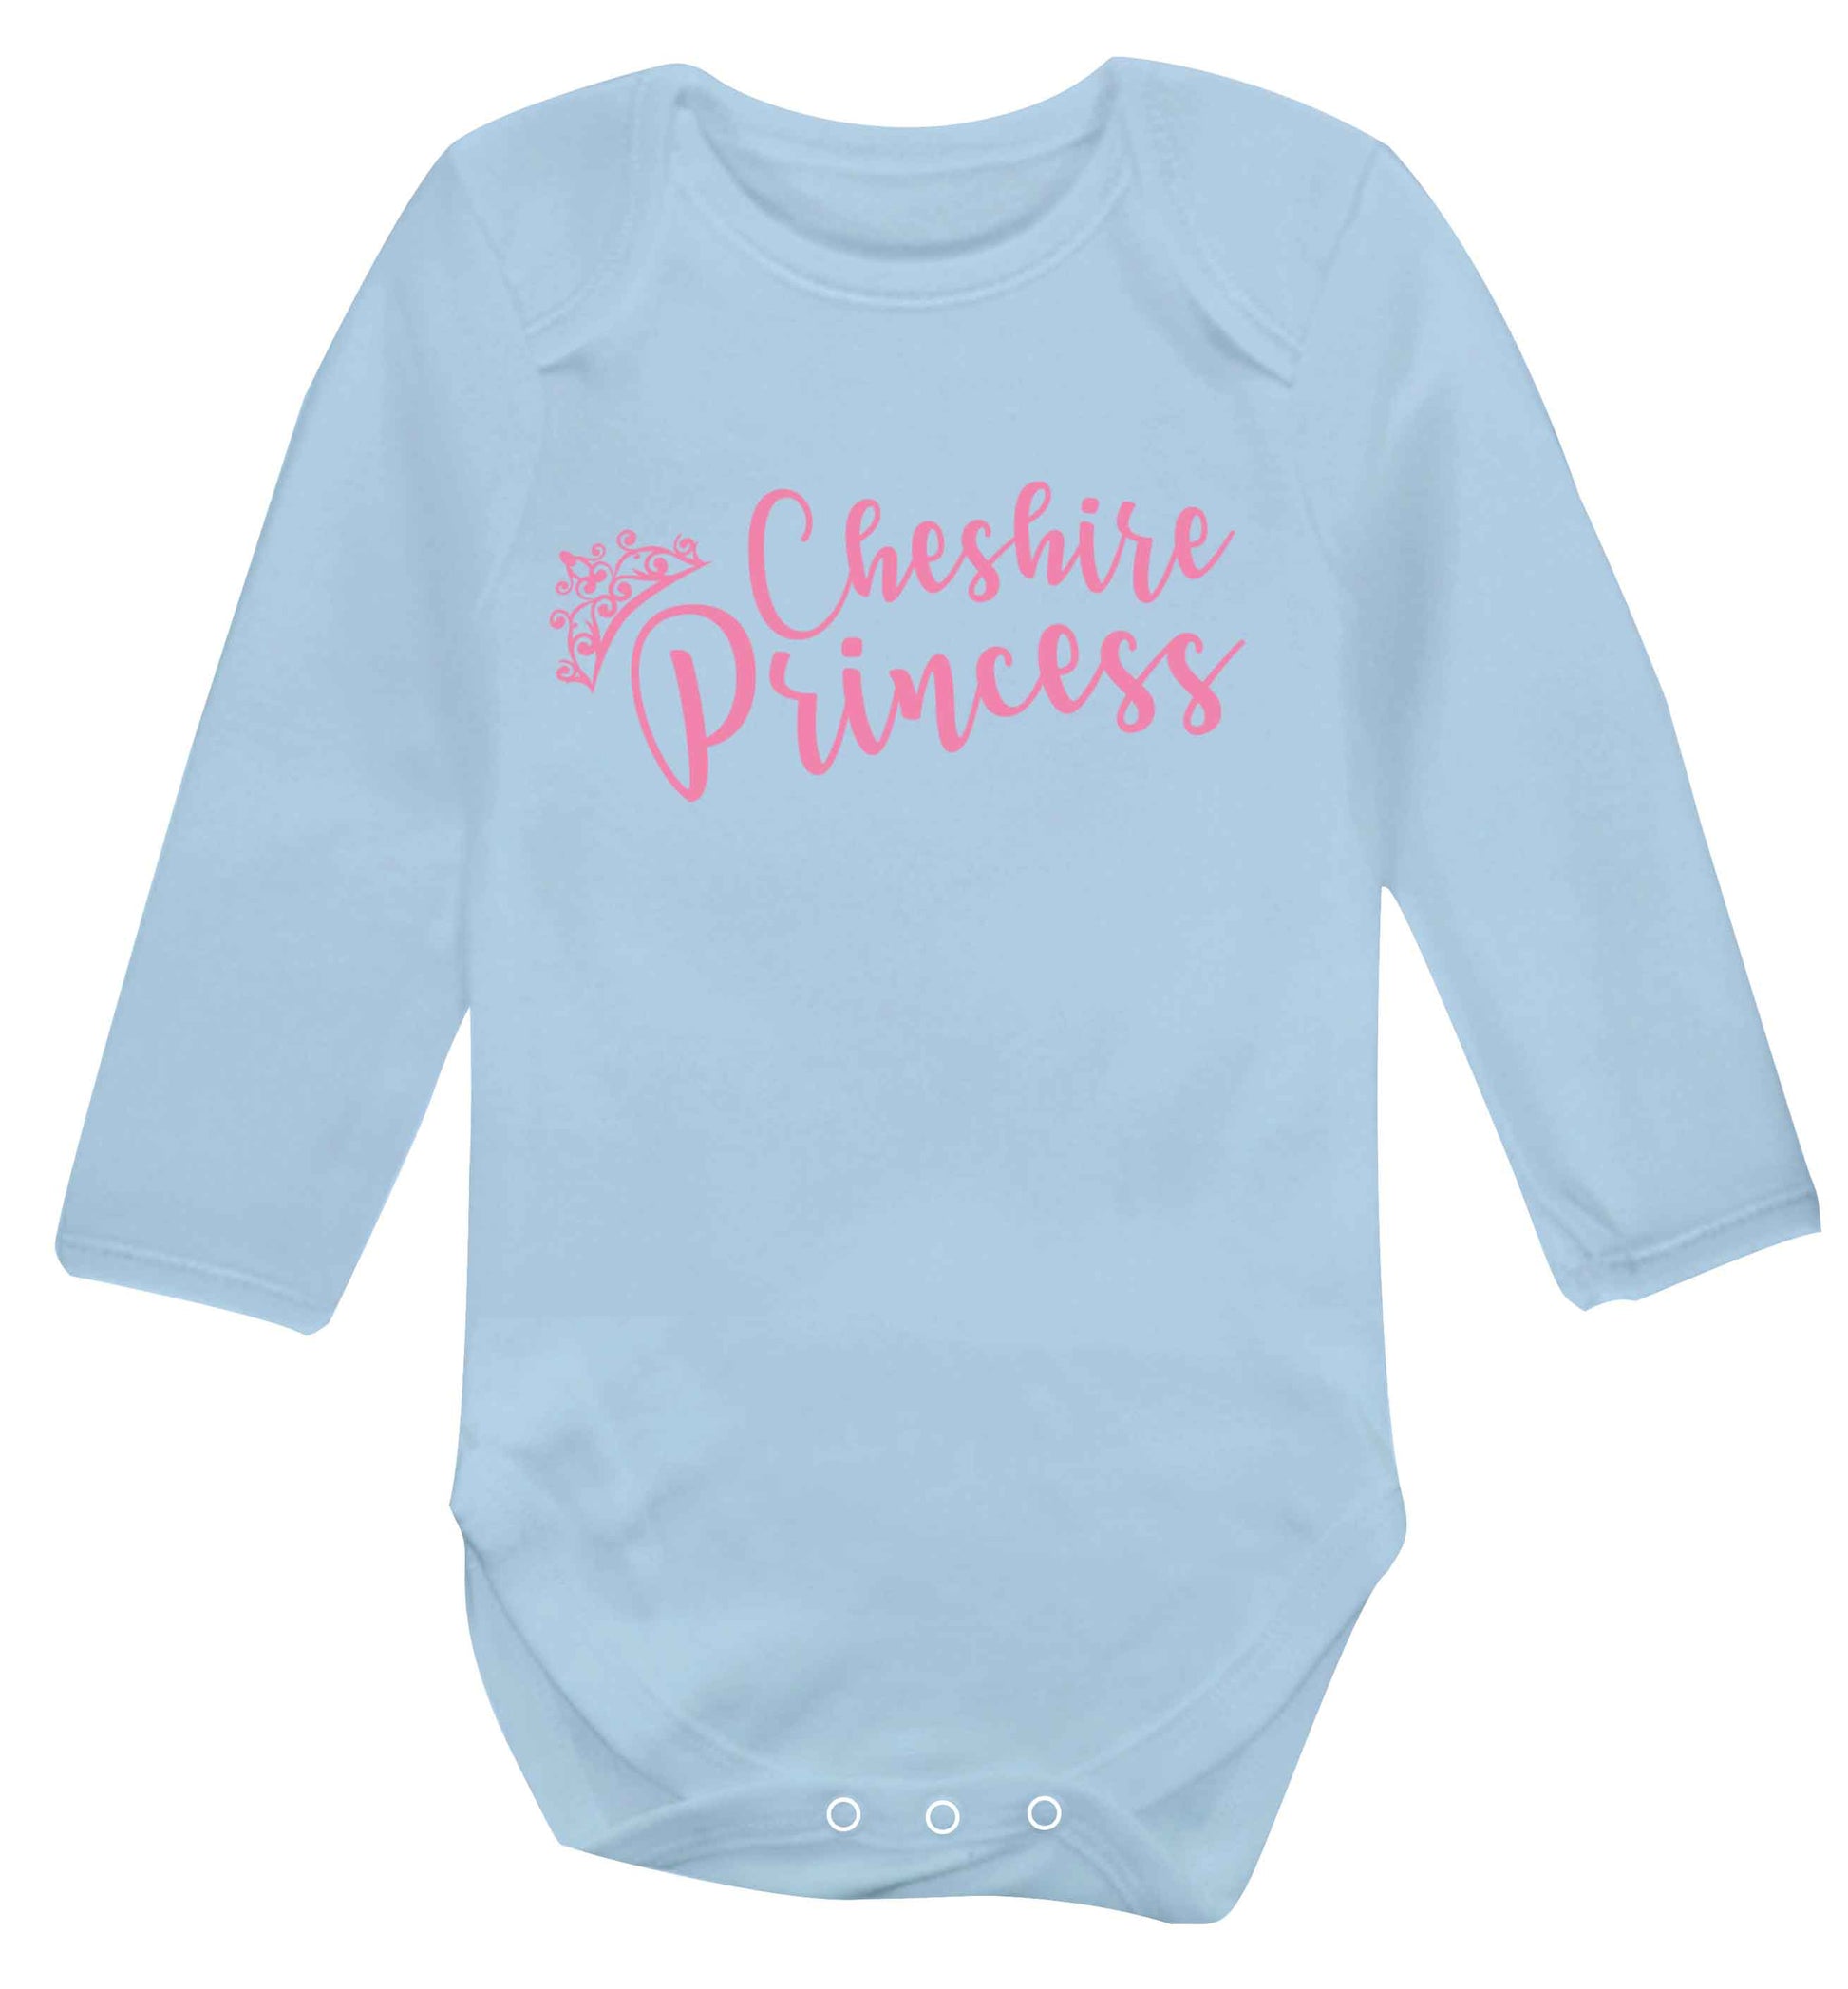 Cheshire princess Baby Vest long sleeved pale blue 6-12 months